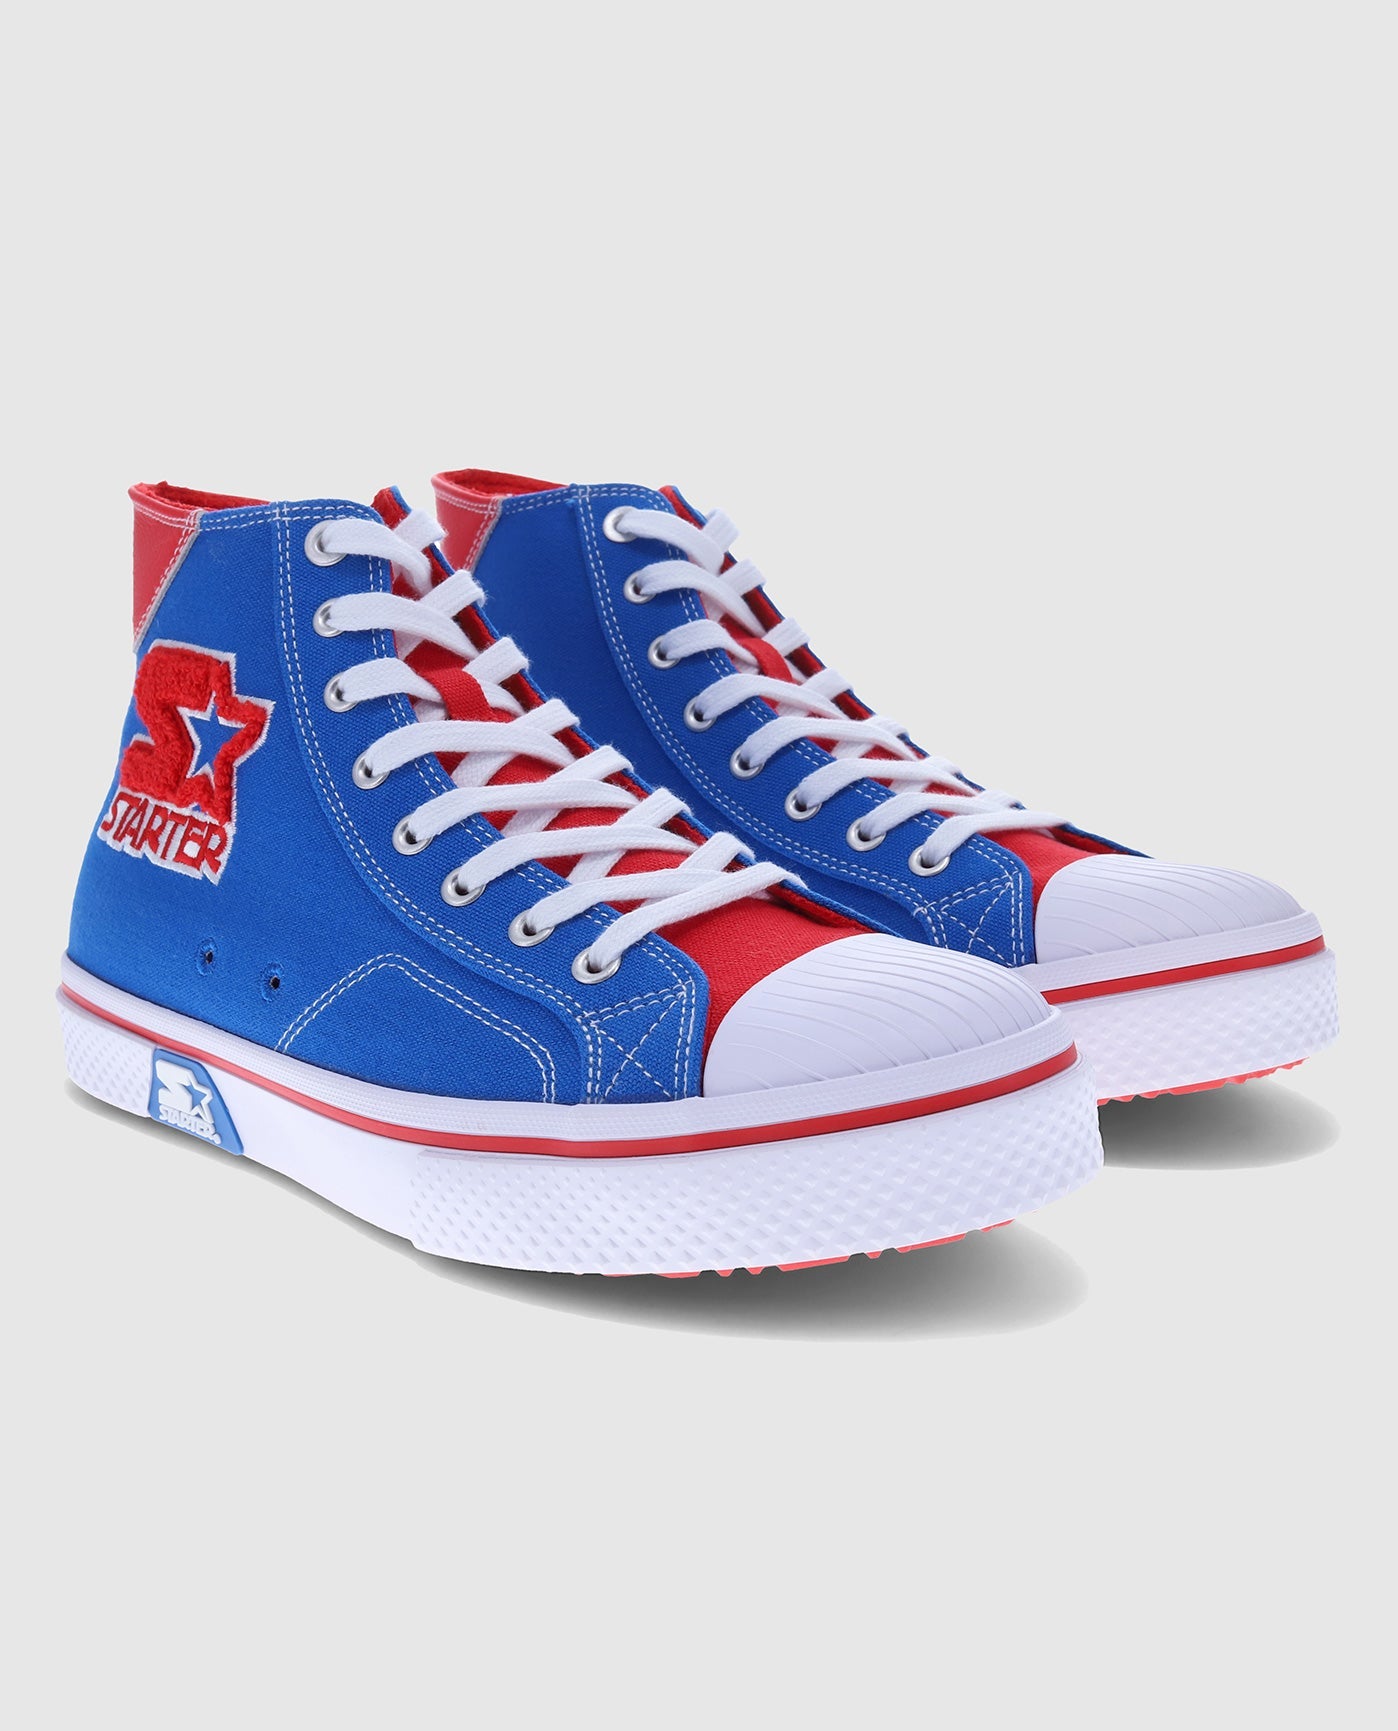 Front of Starter Tradition 71 High Blue Sneaker Pair | Blue